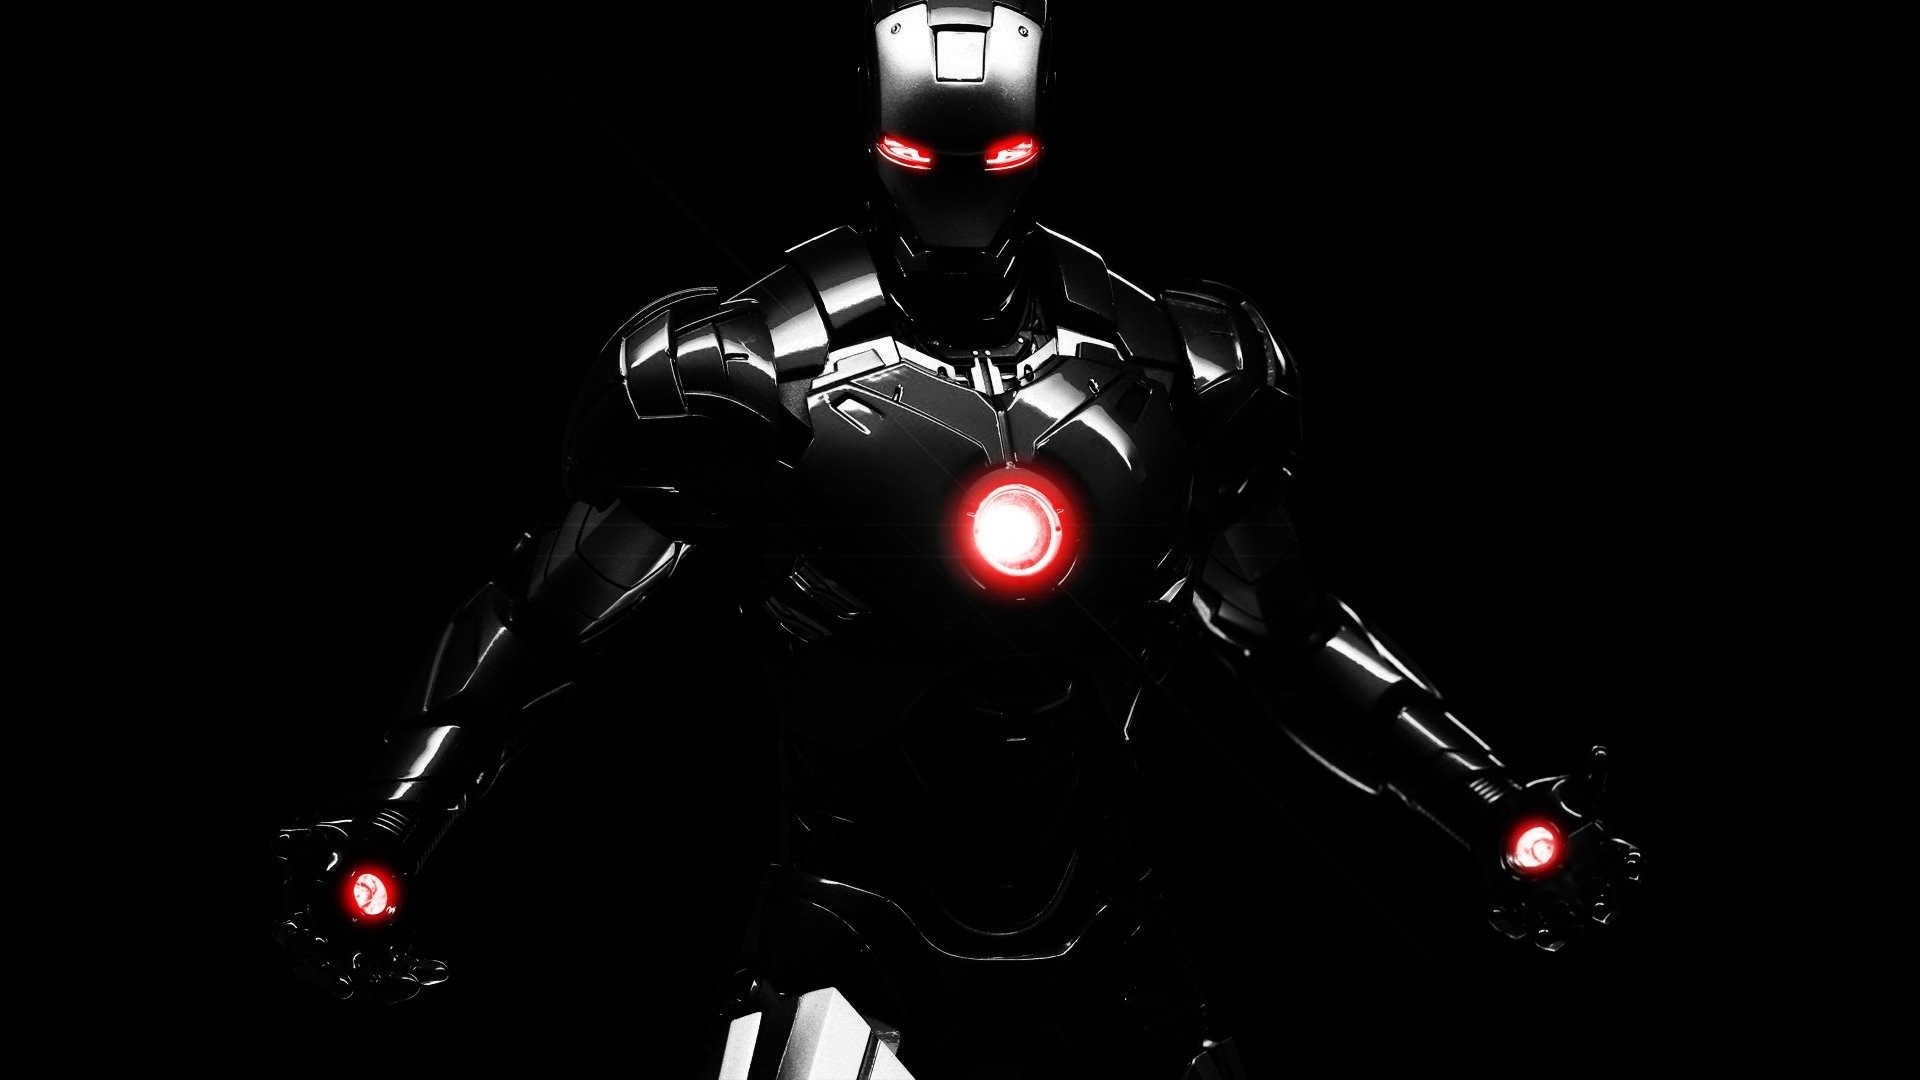 Iron Man Hd Wallpaper 78 Pictures